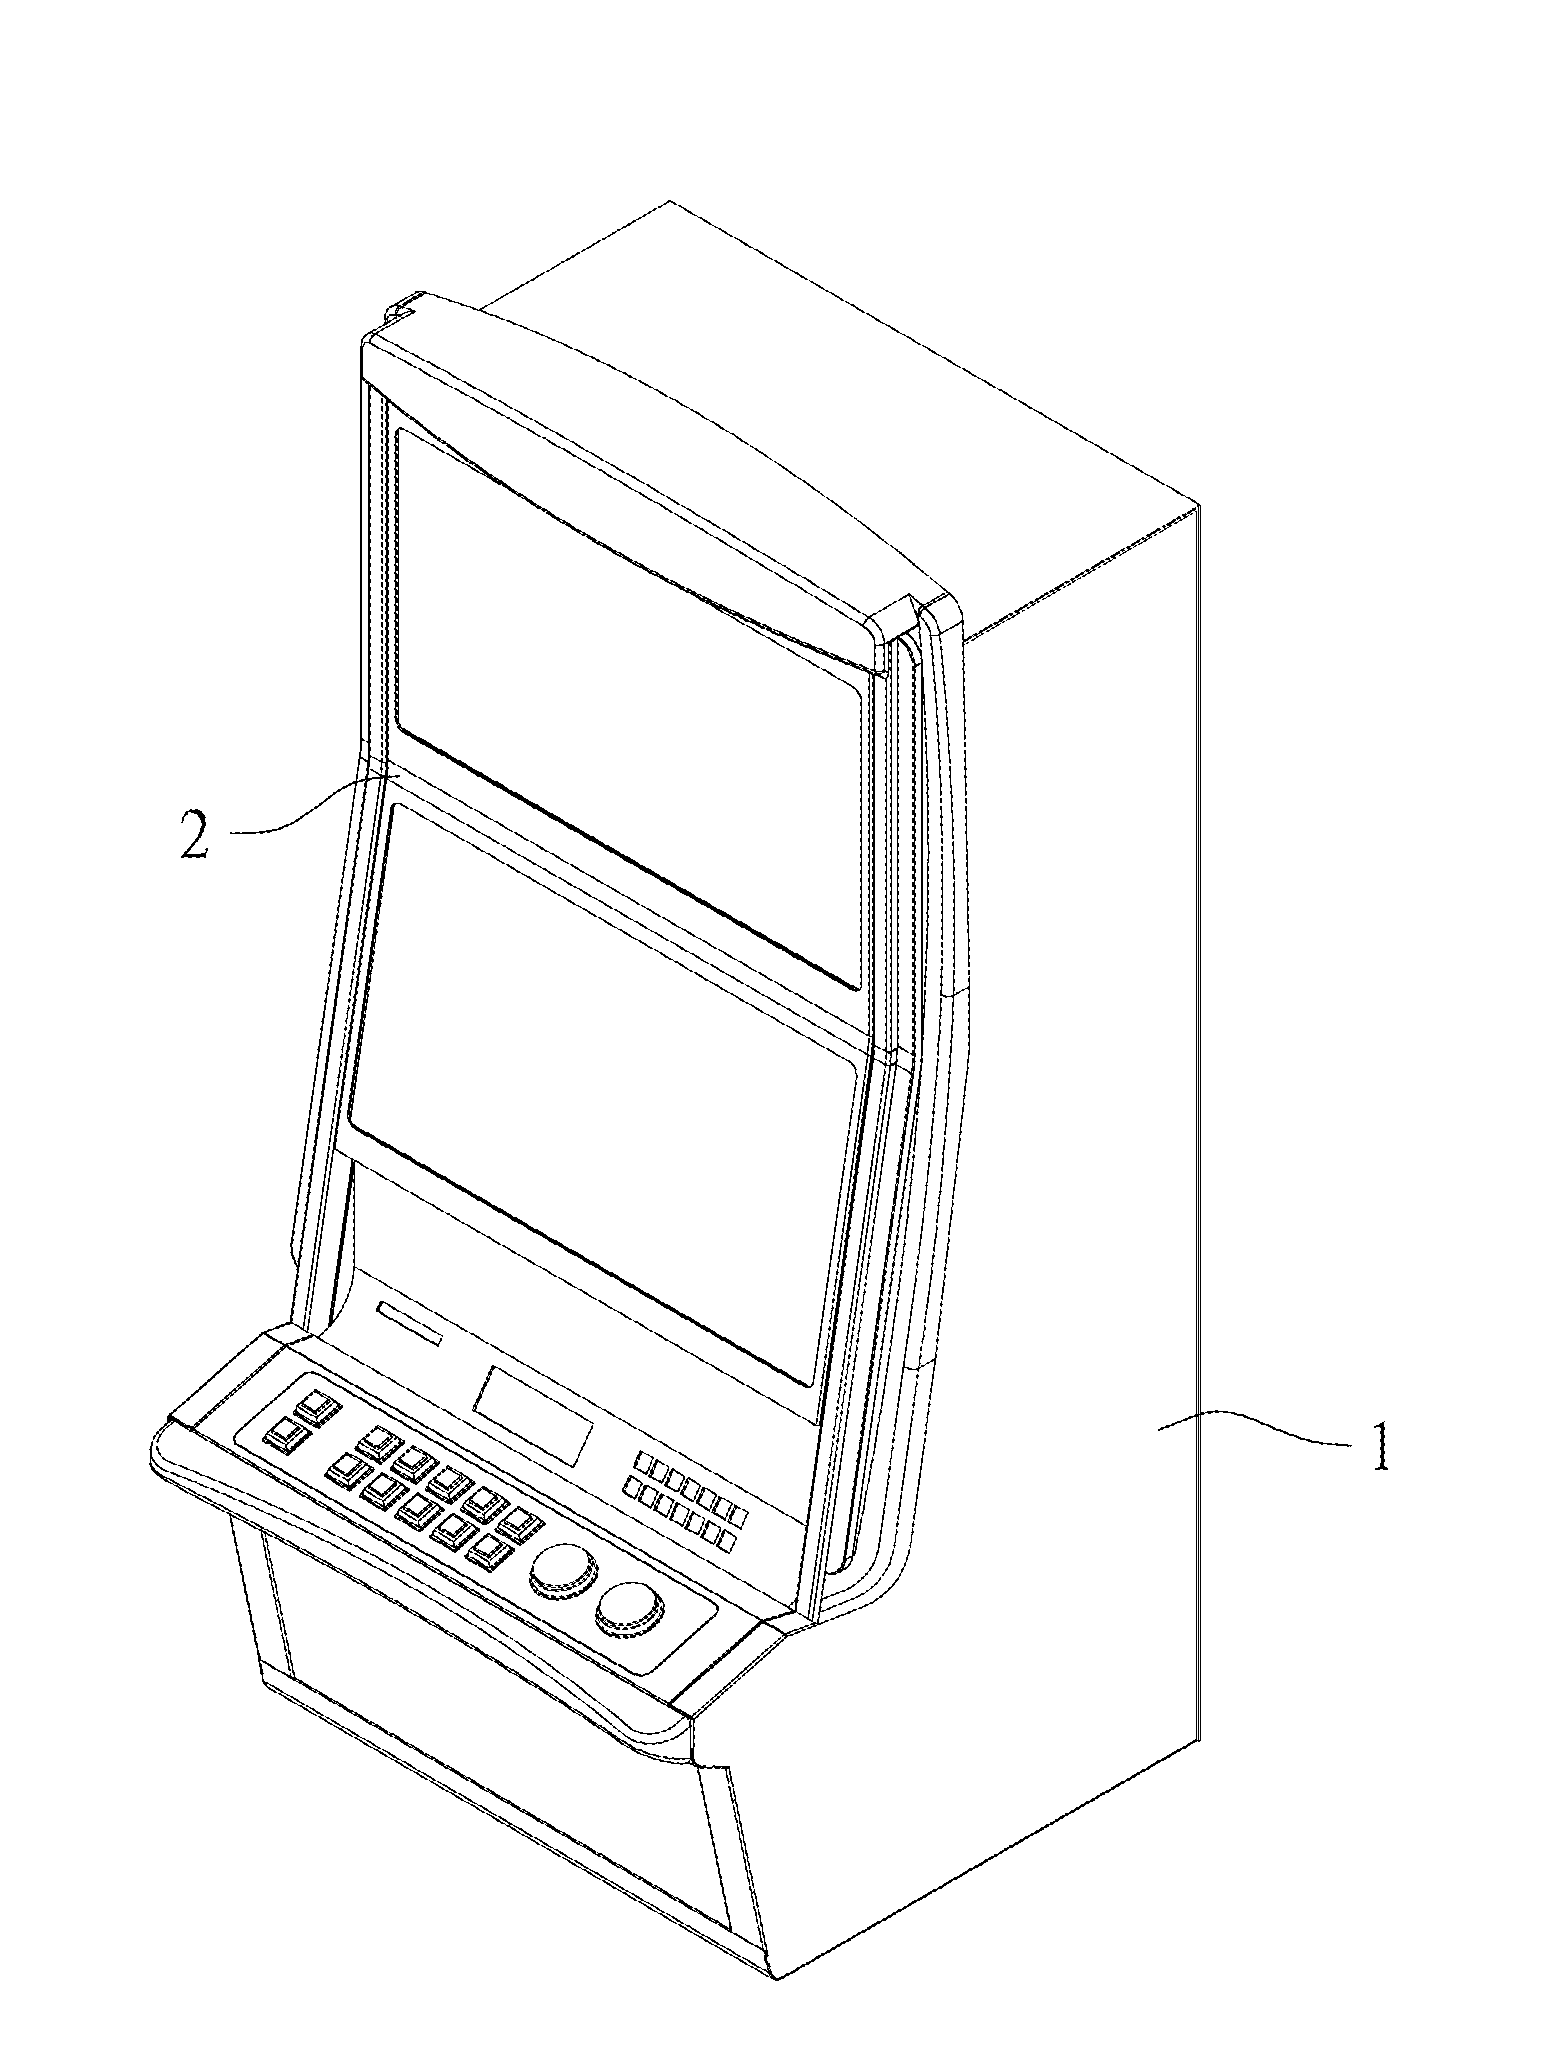 Hinge device for lifting a panel of a game machine